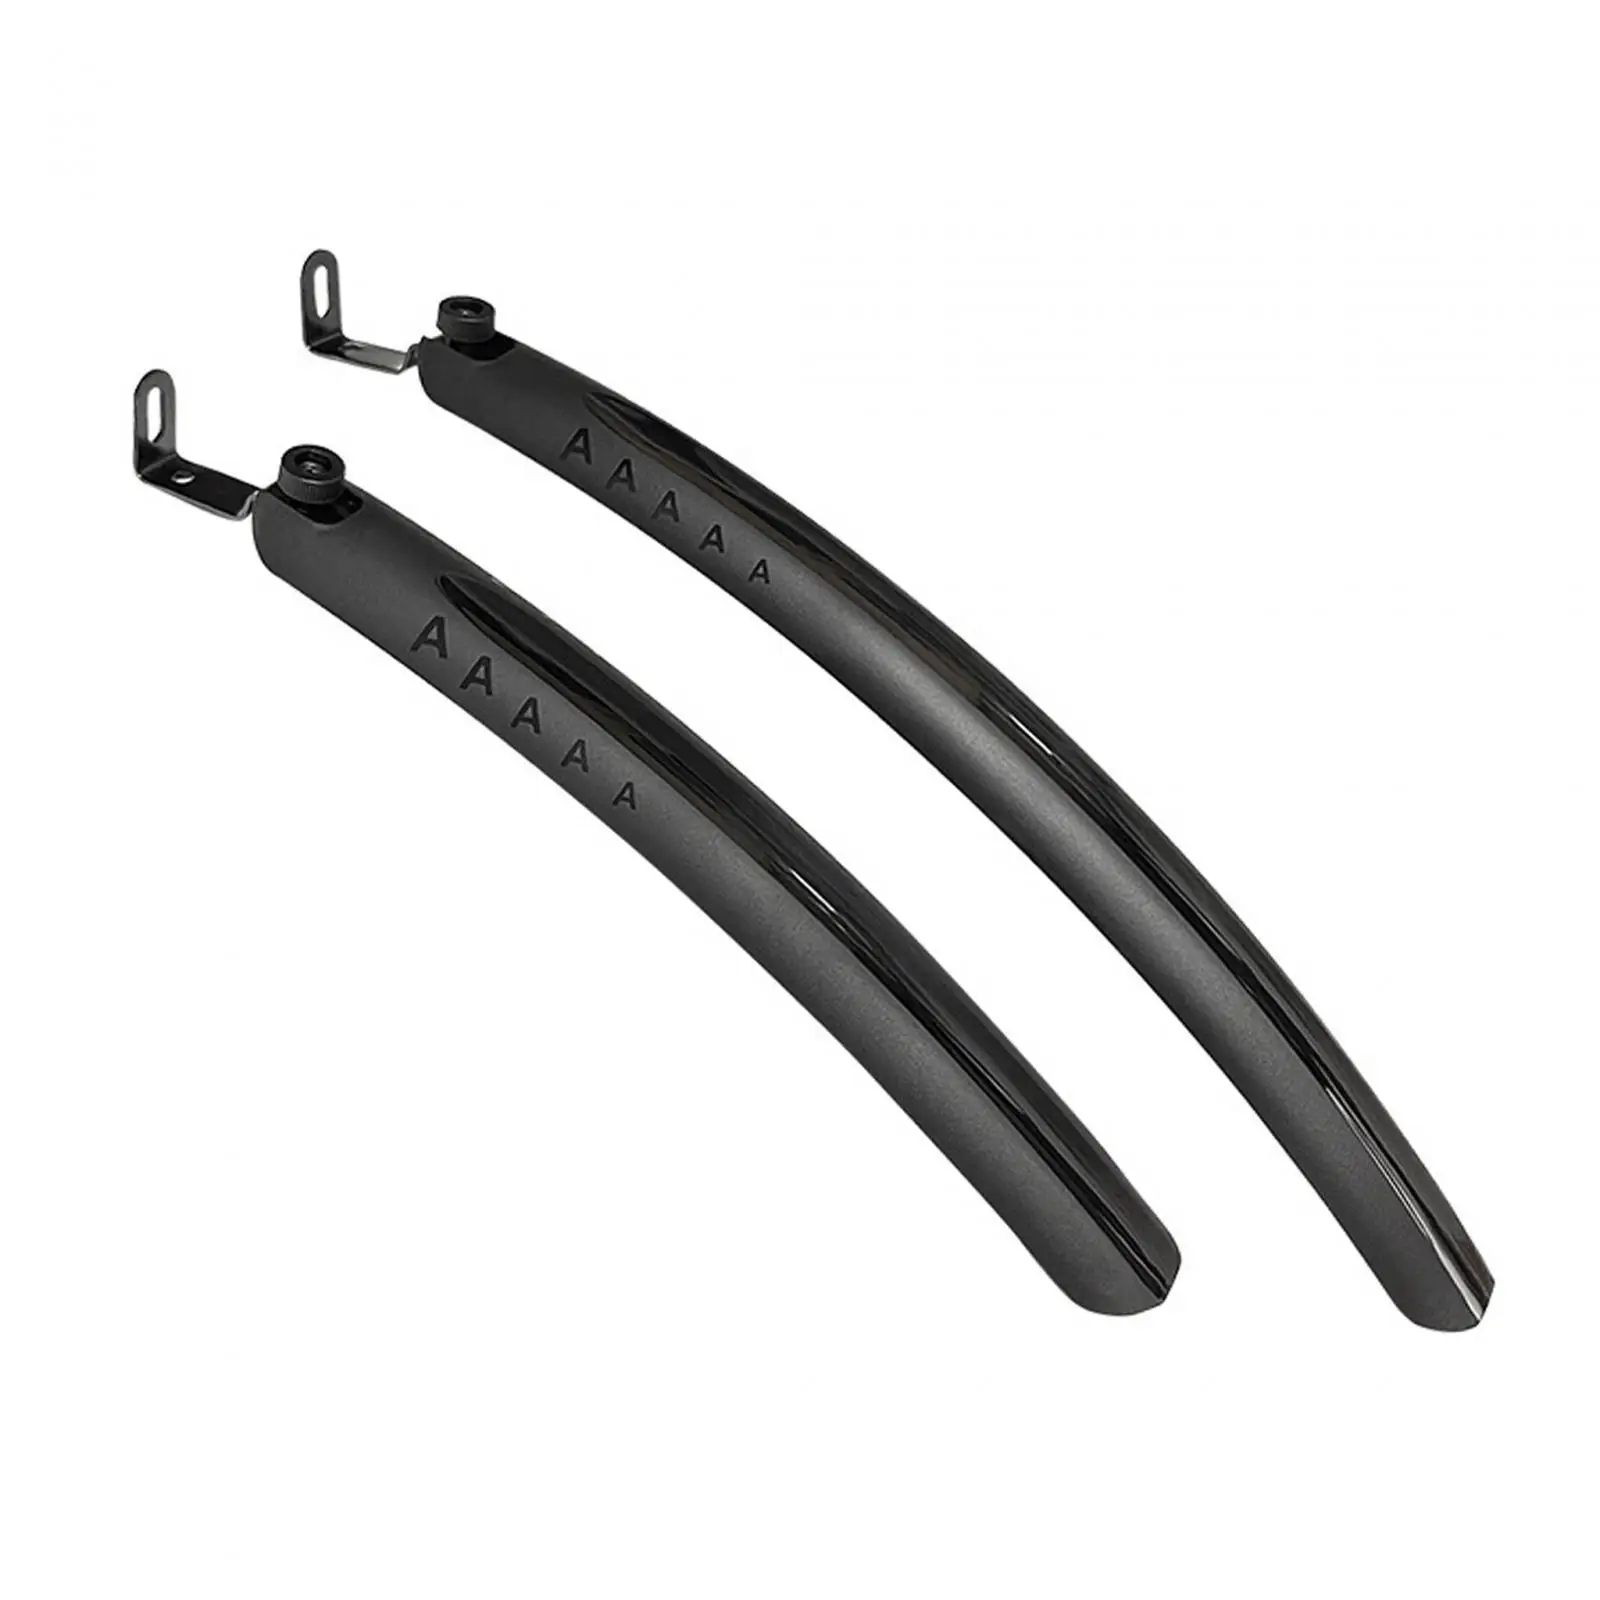 Bicycle Fender Front Rear Mud Guard Mudguards for 26